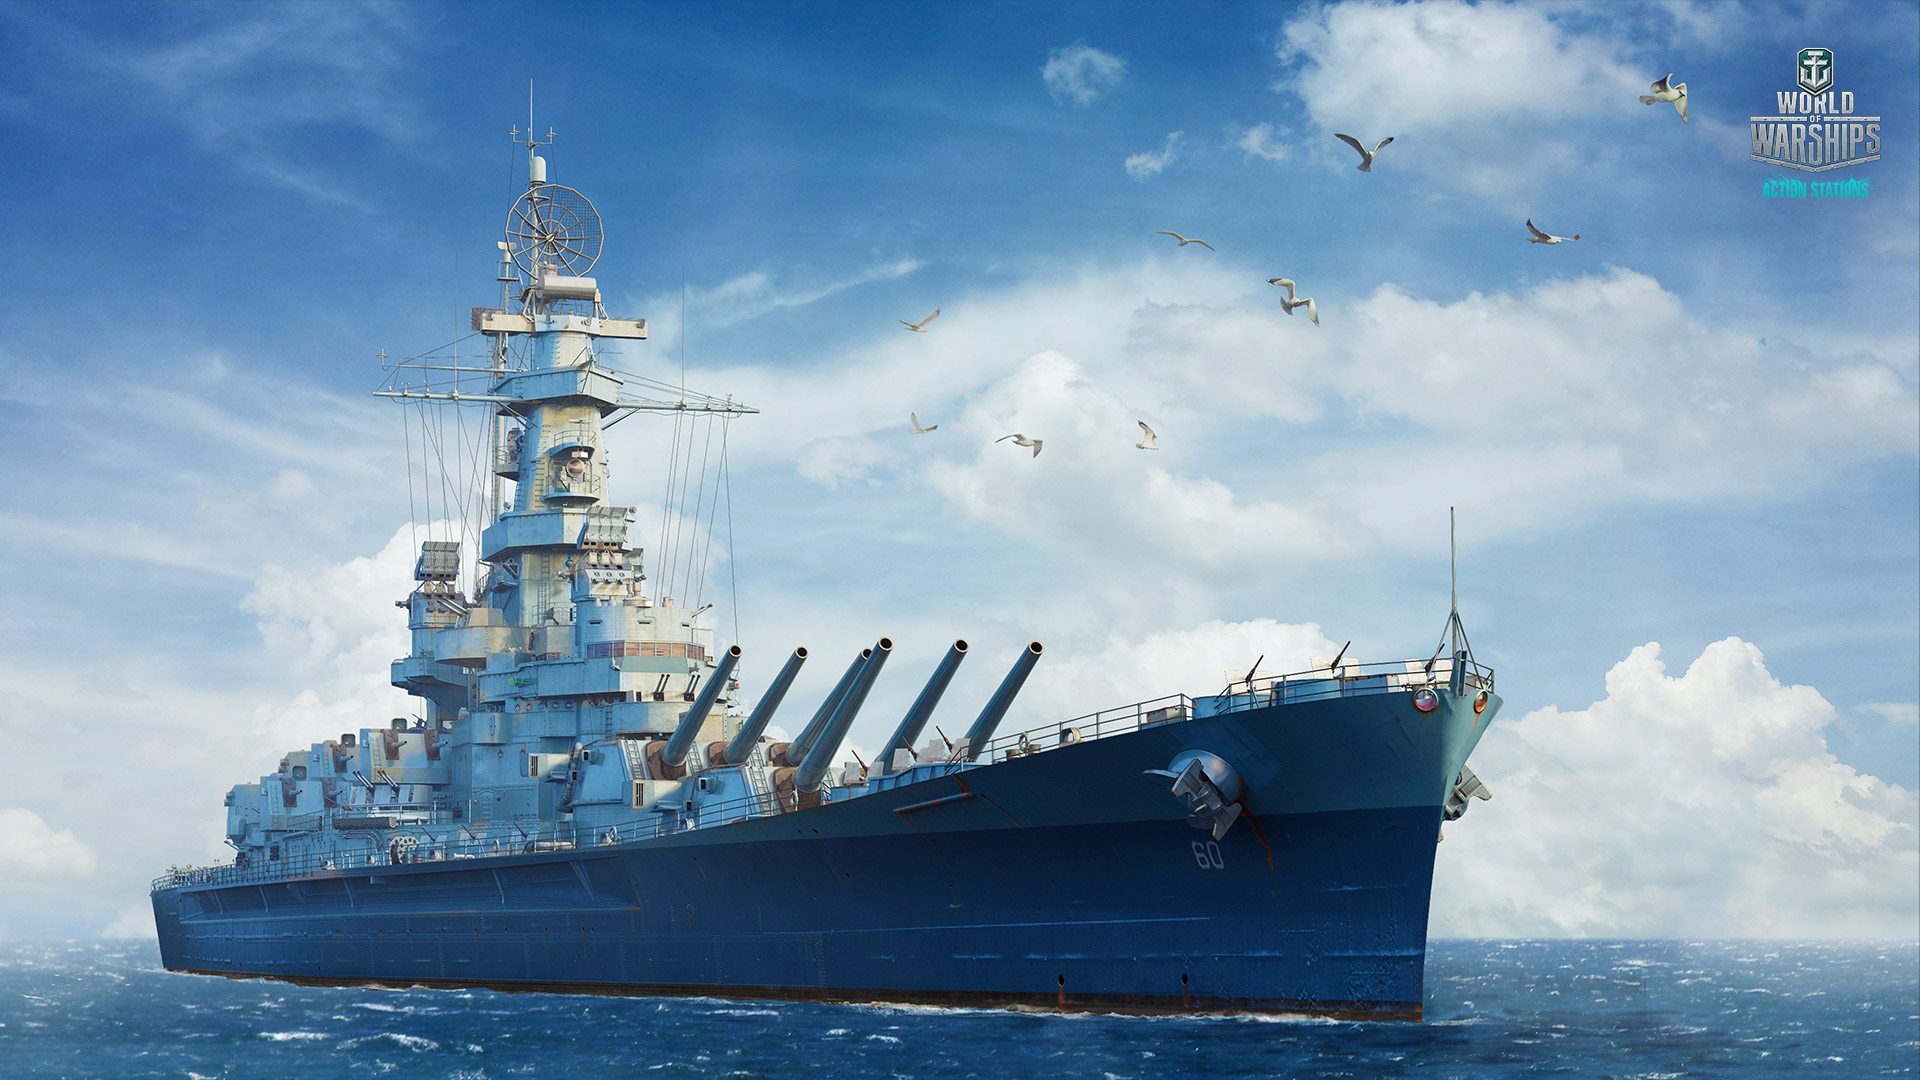 can the uss alabama in world of warships bow be overmatched by 16 inch guns